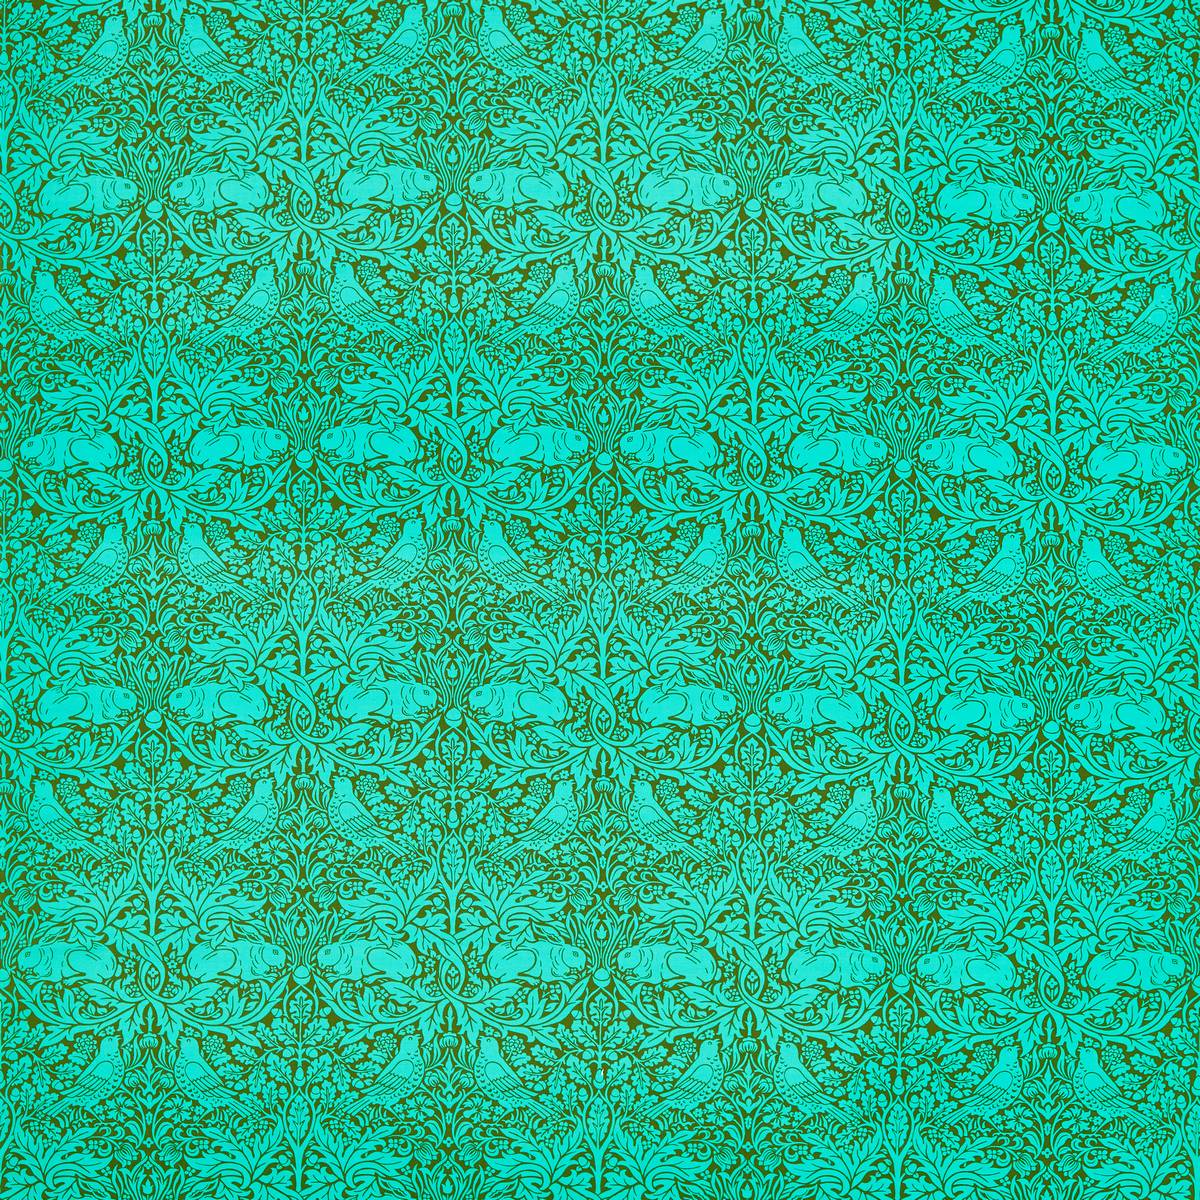 Brer Rabbit Olive/Turquoise Fabric by William Morris & Co.